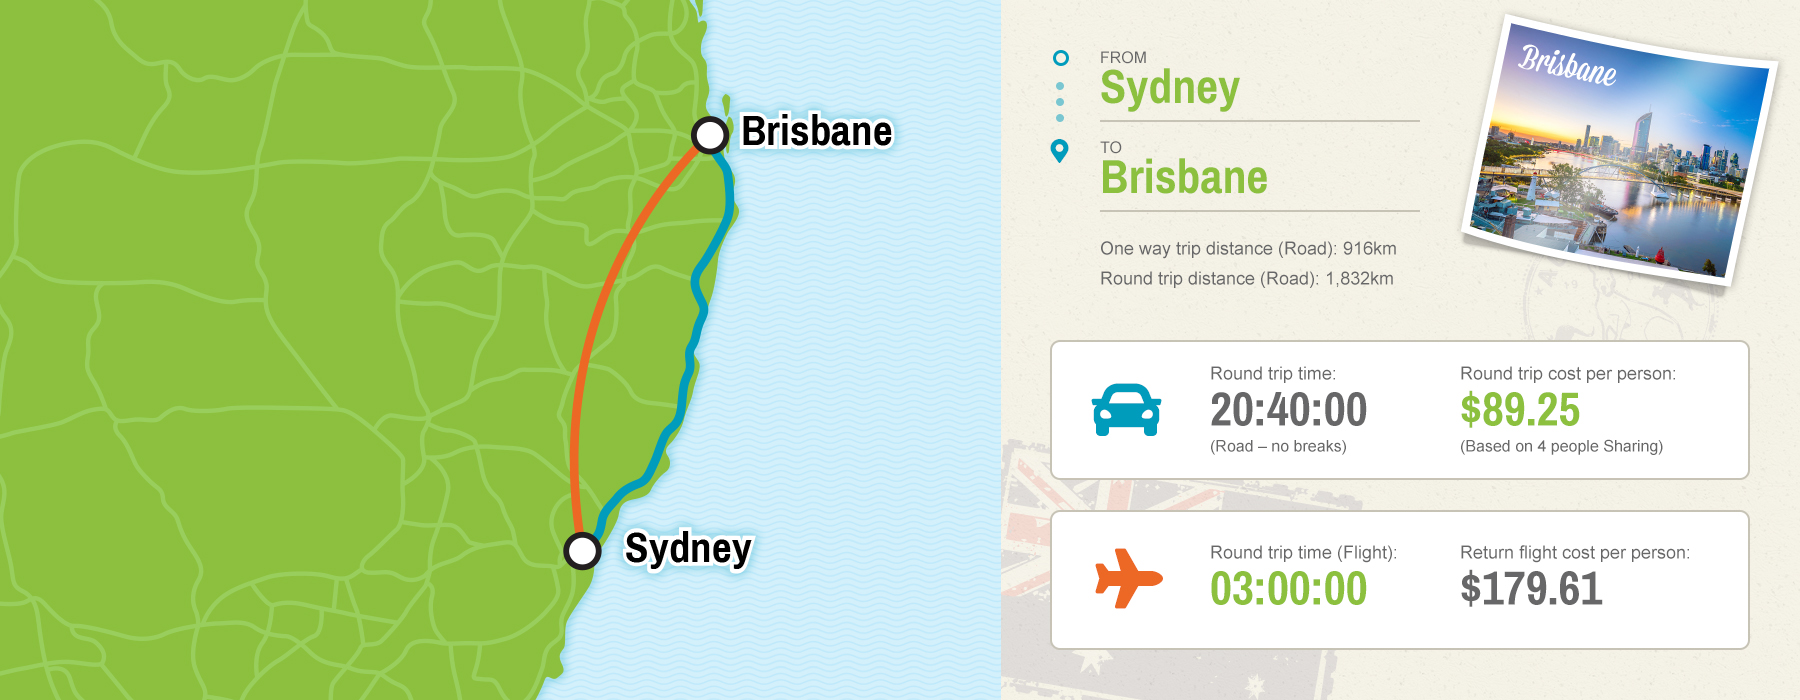 Sydney to Brisbane map showing driving vs flying